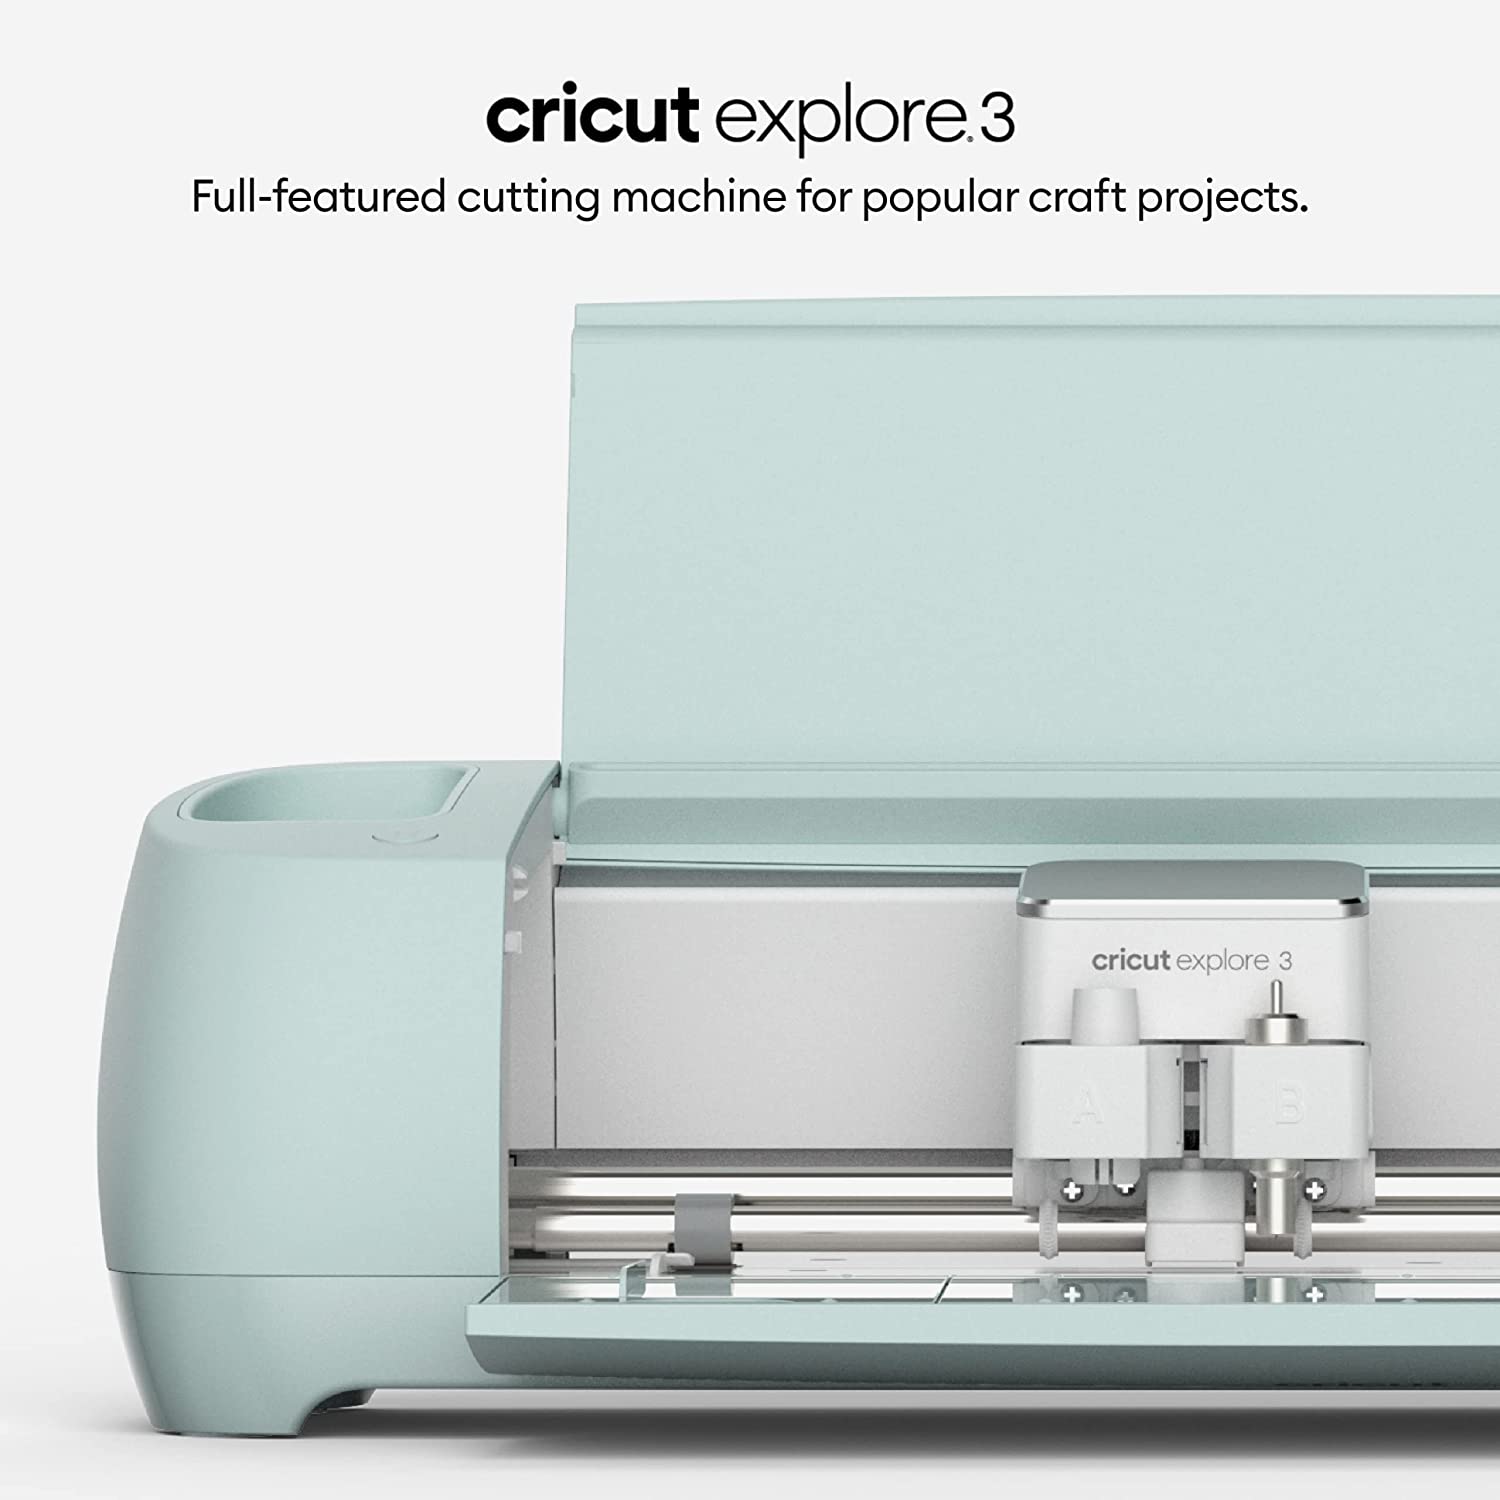 Cricut Explore 3 - 2X Faster DIY Cutting Machine for all Crafts， Matless Cutting with Smart Materials， Cuts 100+ Materials， Bluetooth Connectivity， Compatible with iOS， Android， Windows and Mac